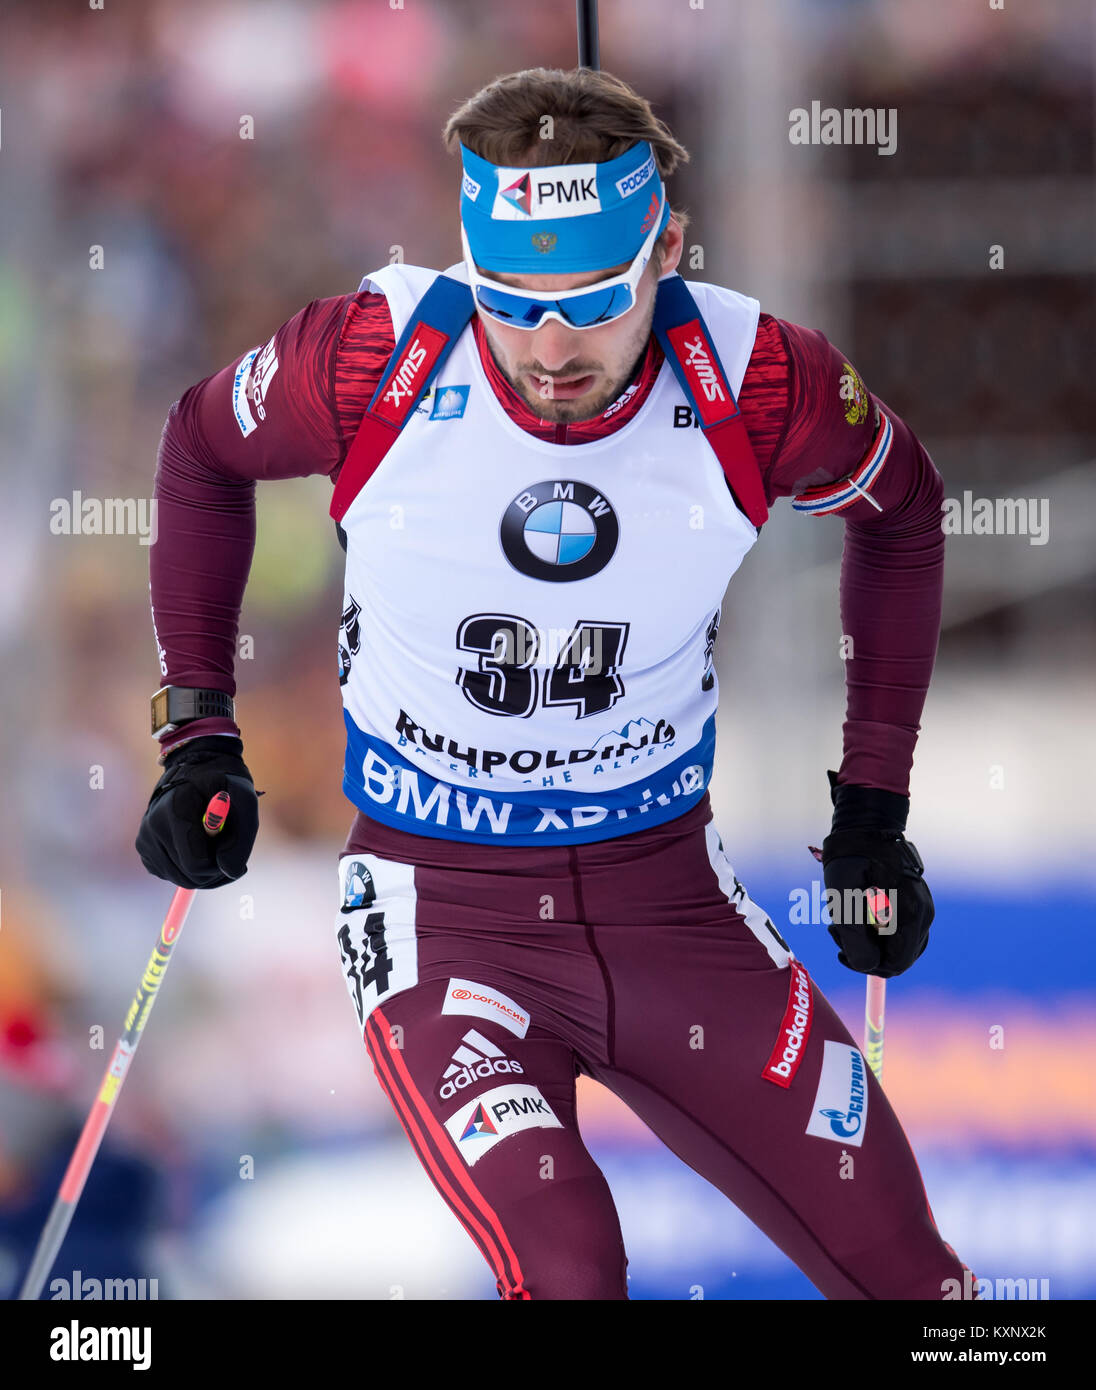 Ruhpolding, Germany. 10th Jan, 2018. Biathlet Anton Schipulin from Rusia skis during the race at Chiemgau Arena in Ruhpolding, Germany, 10 January 2018. Credit: Sven Hoppe/dpa/Alamy Live News Stock Photo